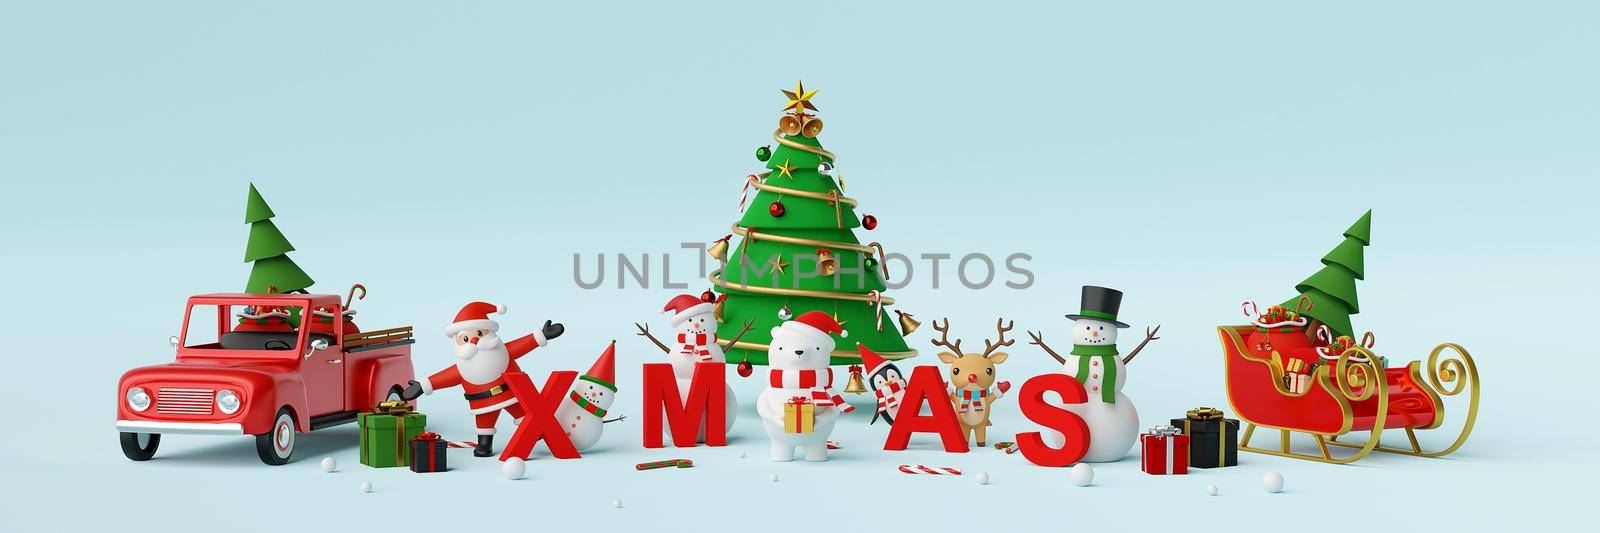 Merry Christmas and Happy New Year, Banner background of Santa Claus and Christmas character with letters XMAS, 3d rendering by nutzchotwarut